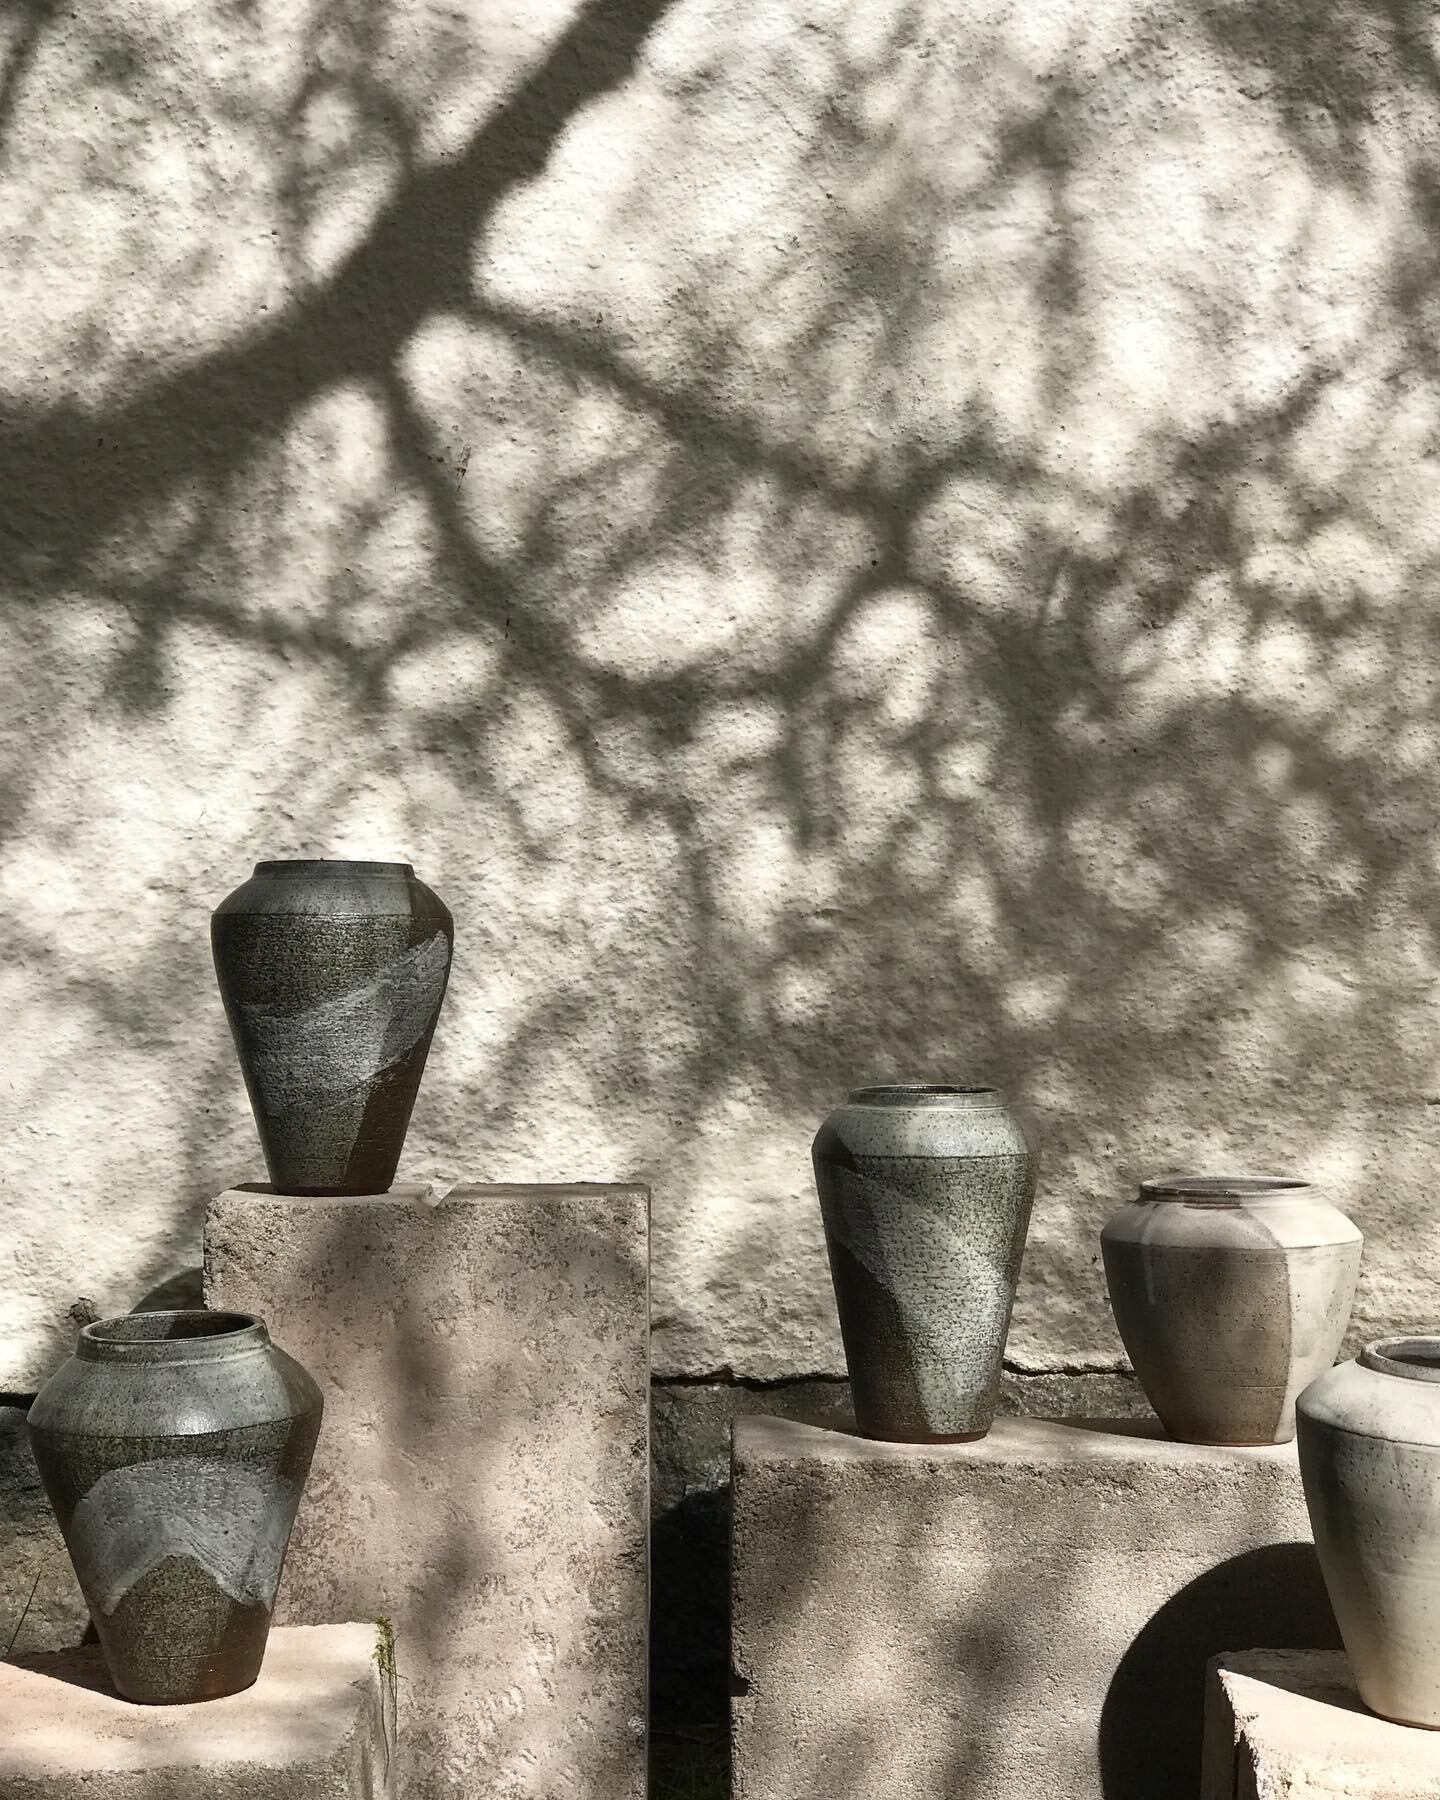 Sneak peek of &rdquo;Turned towards the sun - V&auml;nd mot solen&rdquo; exhibition at @hildasholm 

Welcome to Hildasholm, Leksand, to see more art from the ceramic form students ( me included ✌️) at Leksands folk high school.

13 May to 10 of July.